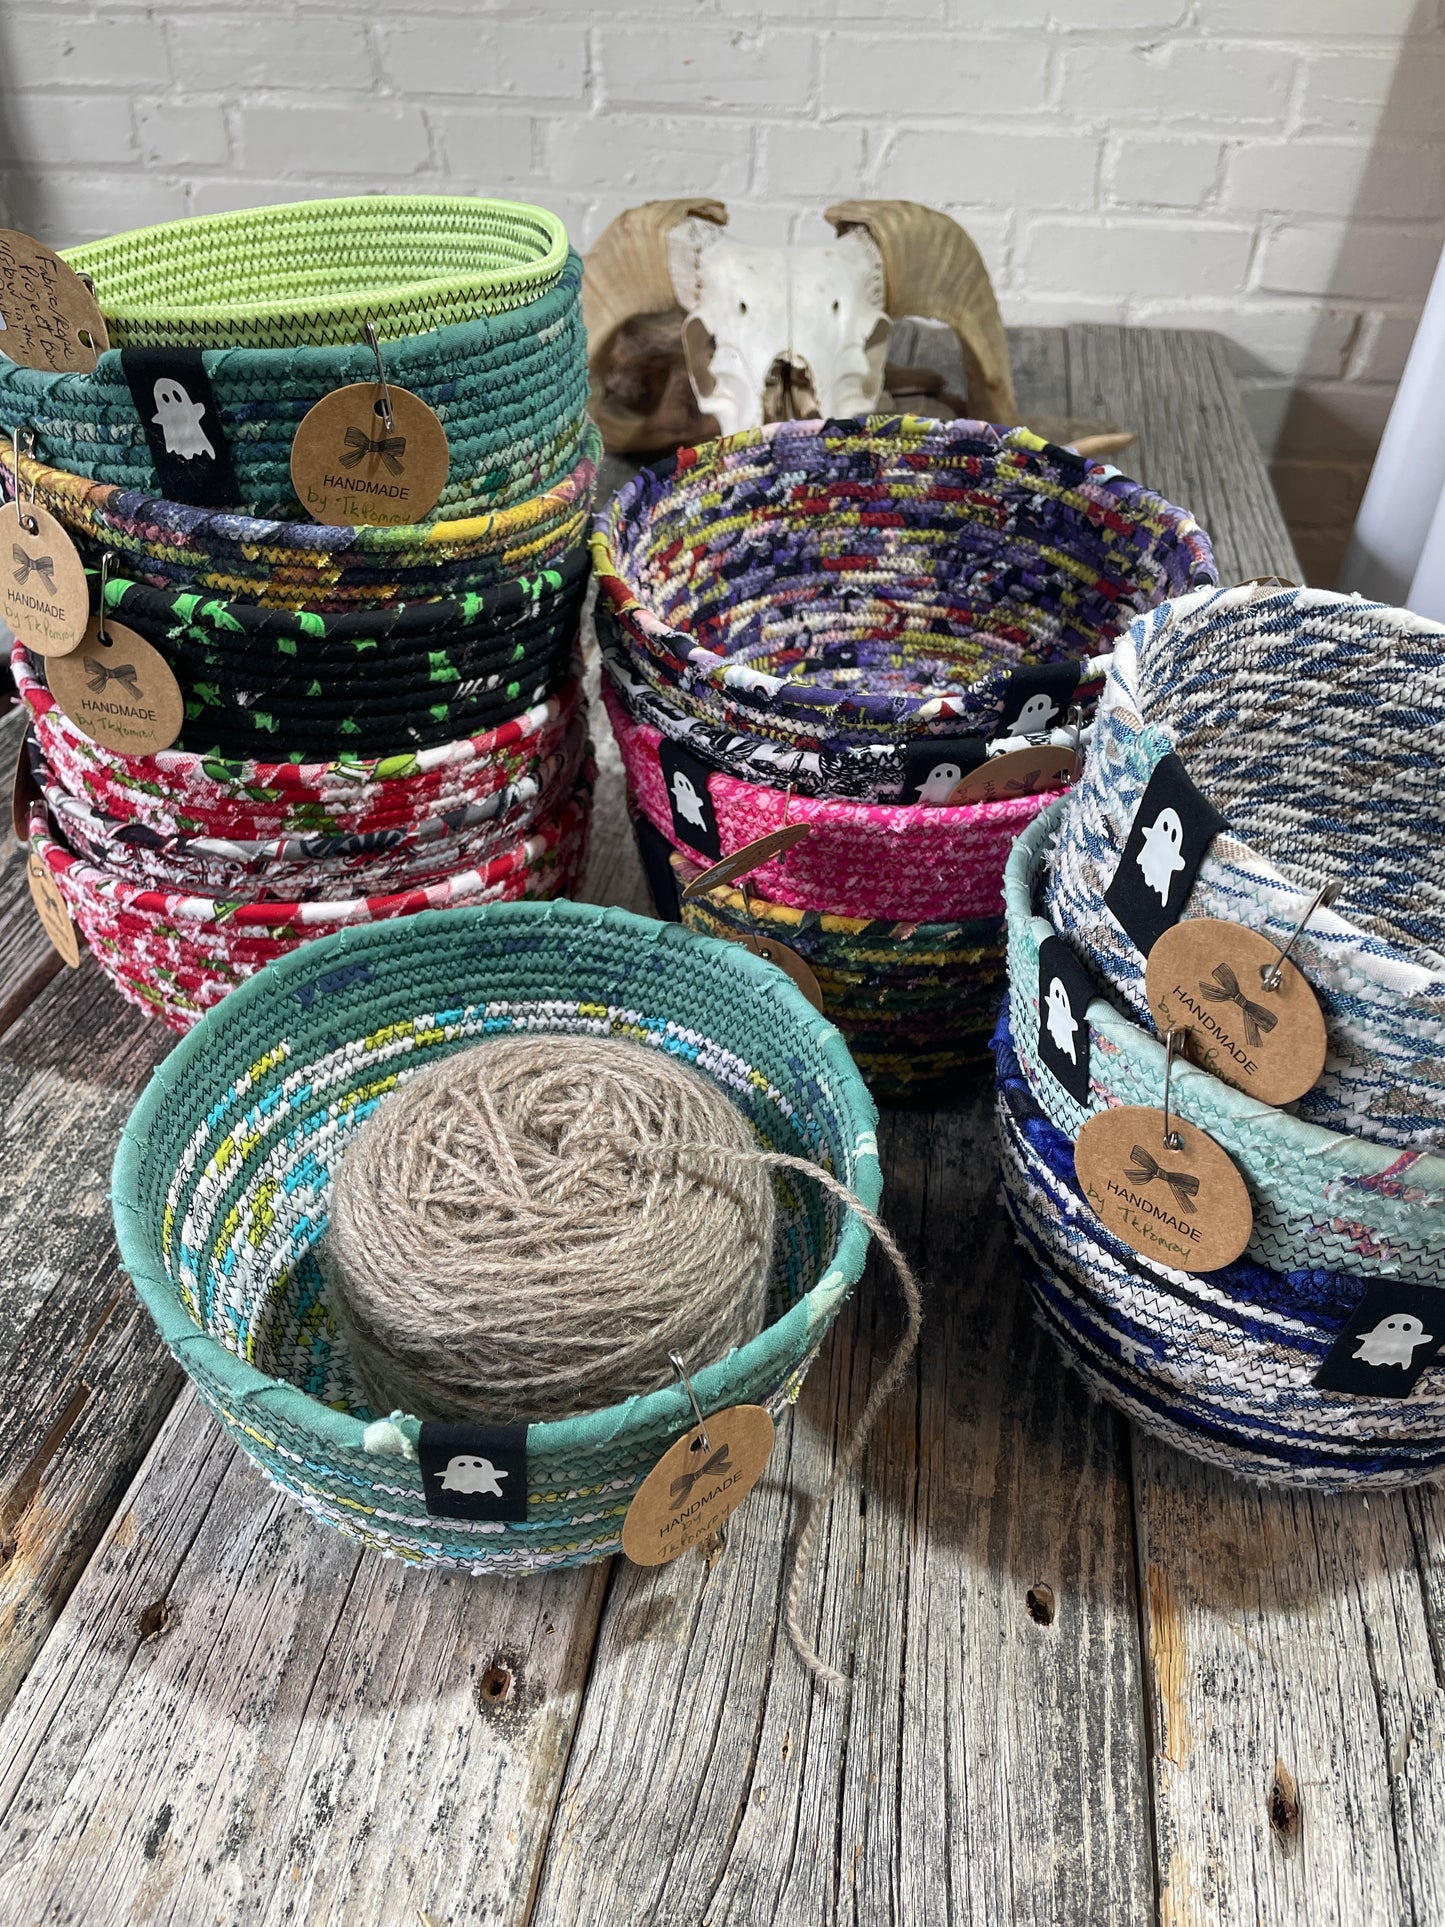 Jutila & Bandana - Handmade Fabric/Rope Project Bowls by TkPomroy/The Wooly Ghost